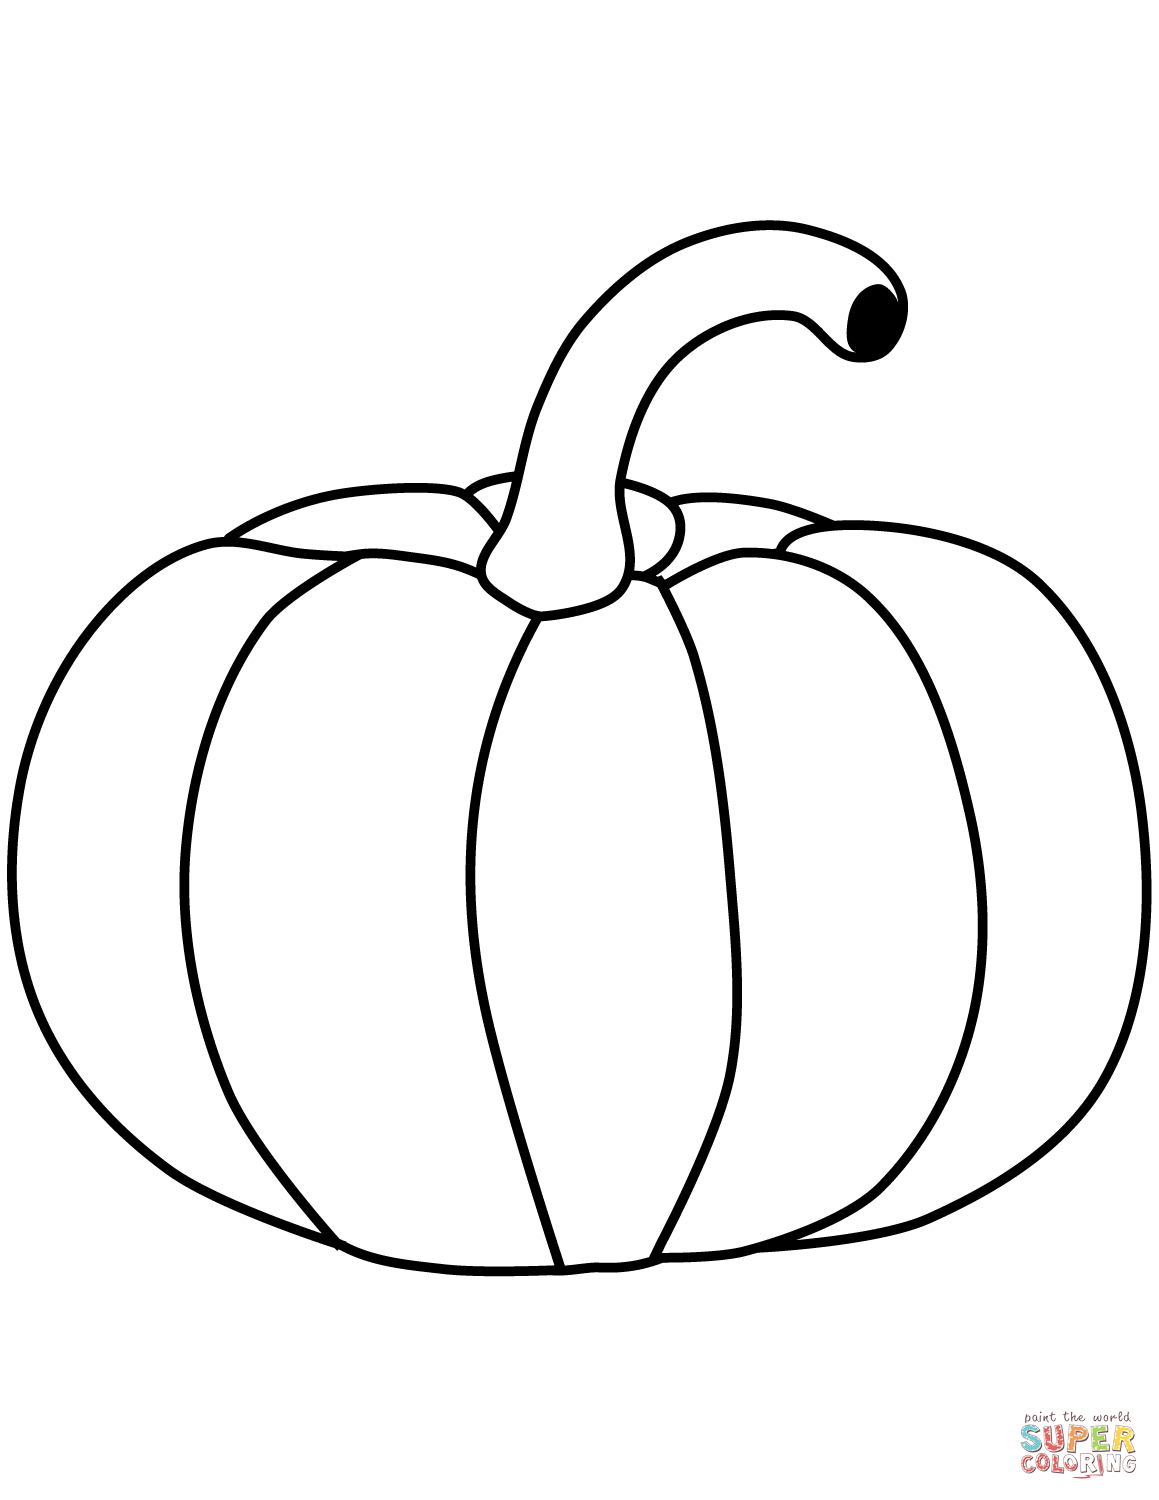 Coloring Page Of Pumpkin Pumpkins Coloring Pages Free Coloring Pages